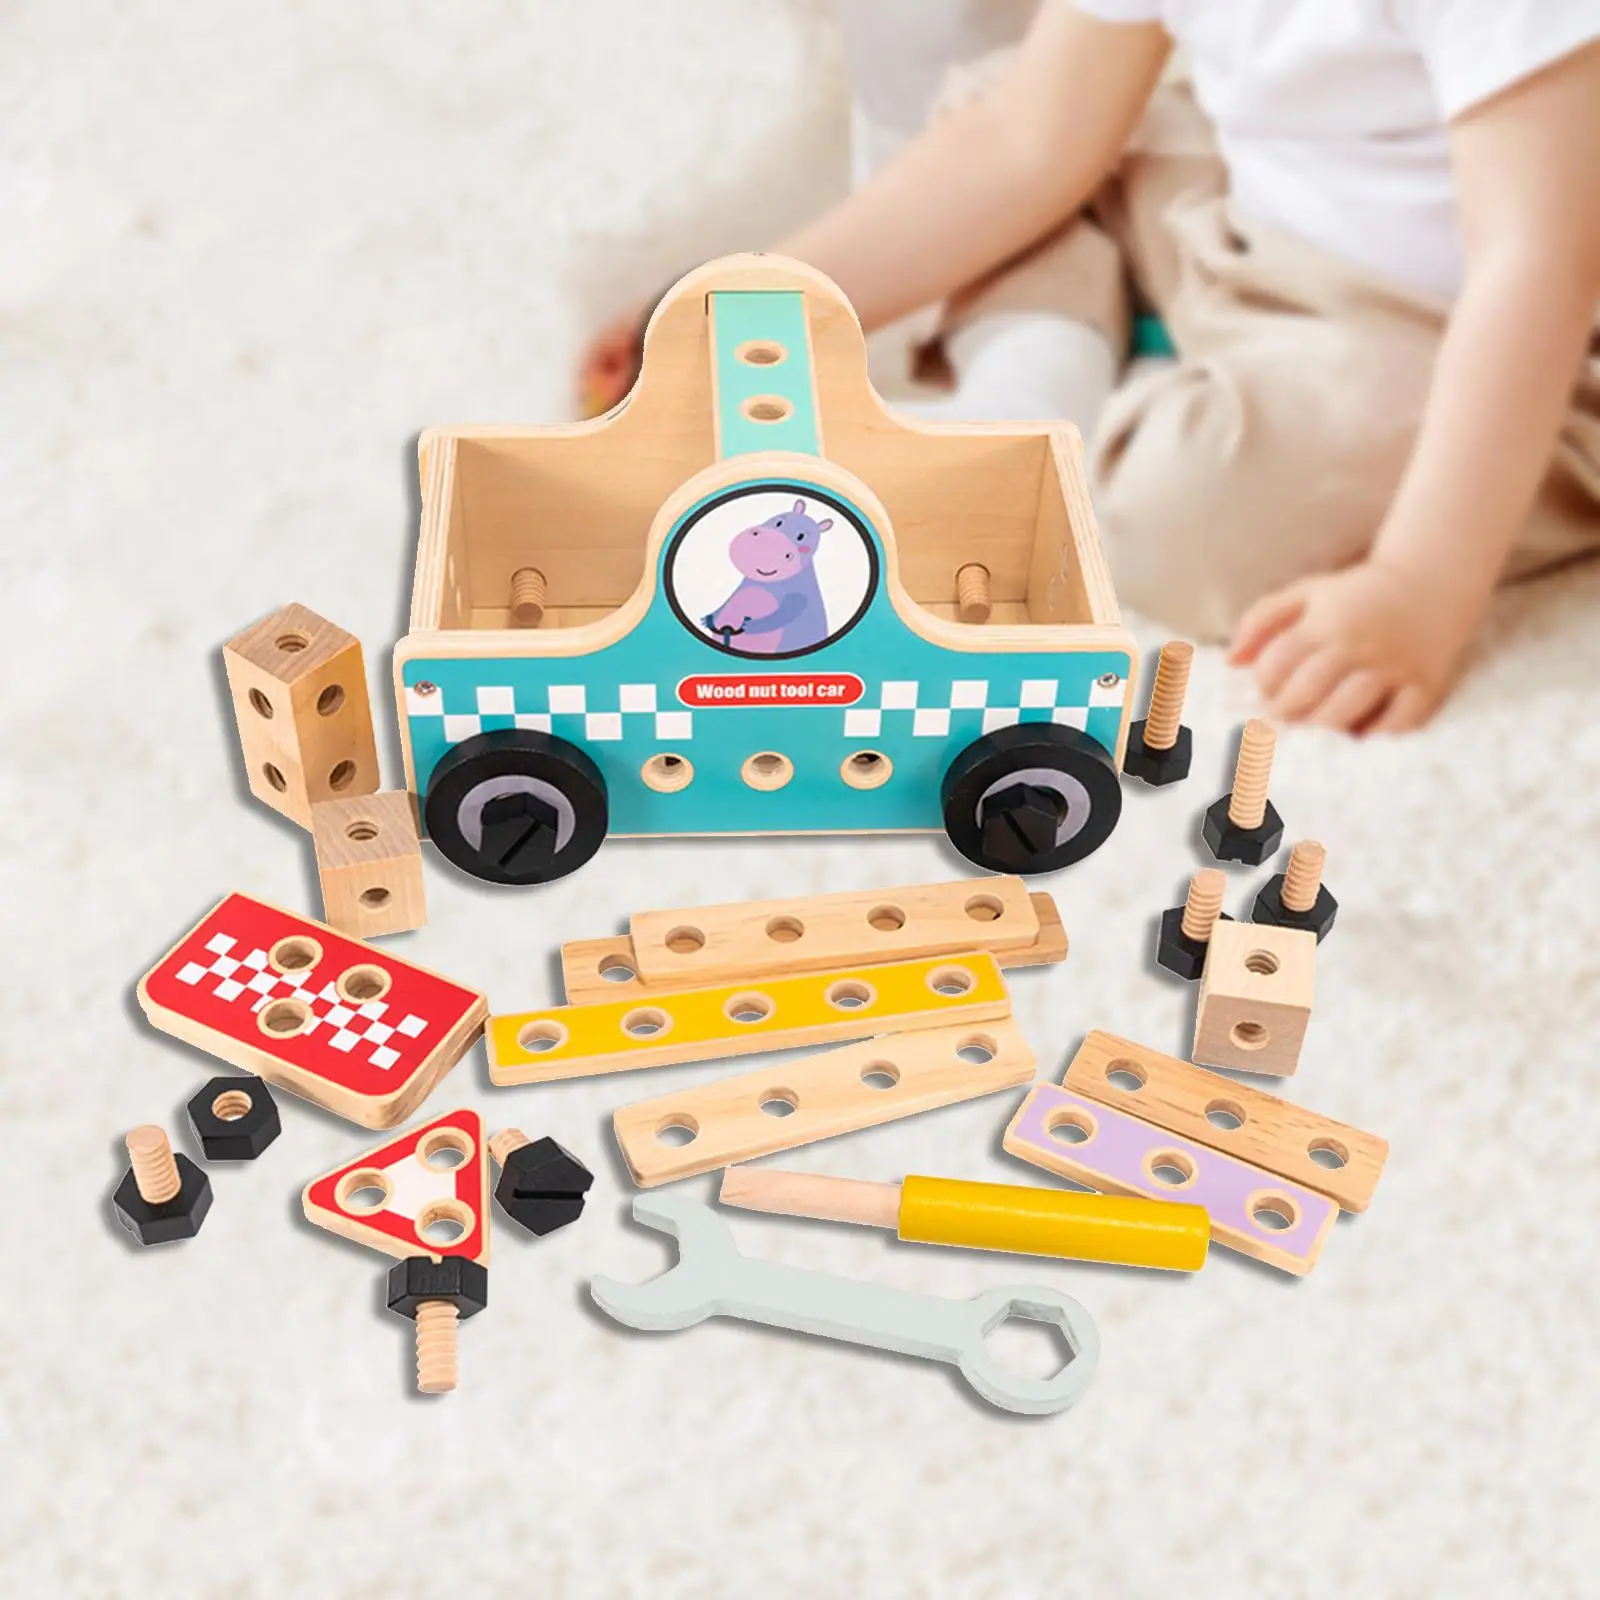 Wooden Repair Tool Box Tool Bench Assembly Set Birthday Gift Wooden Building Set for Children Boys Girls Toddler Ages 3-6 Kids